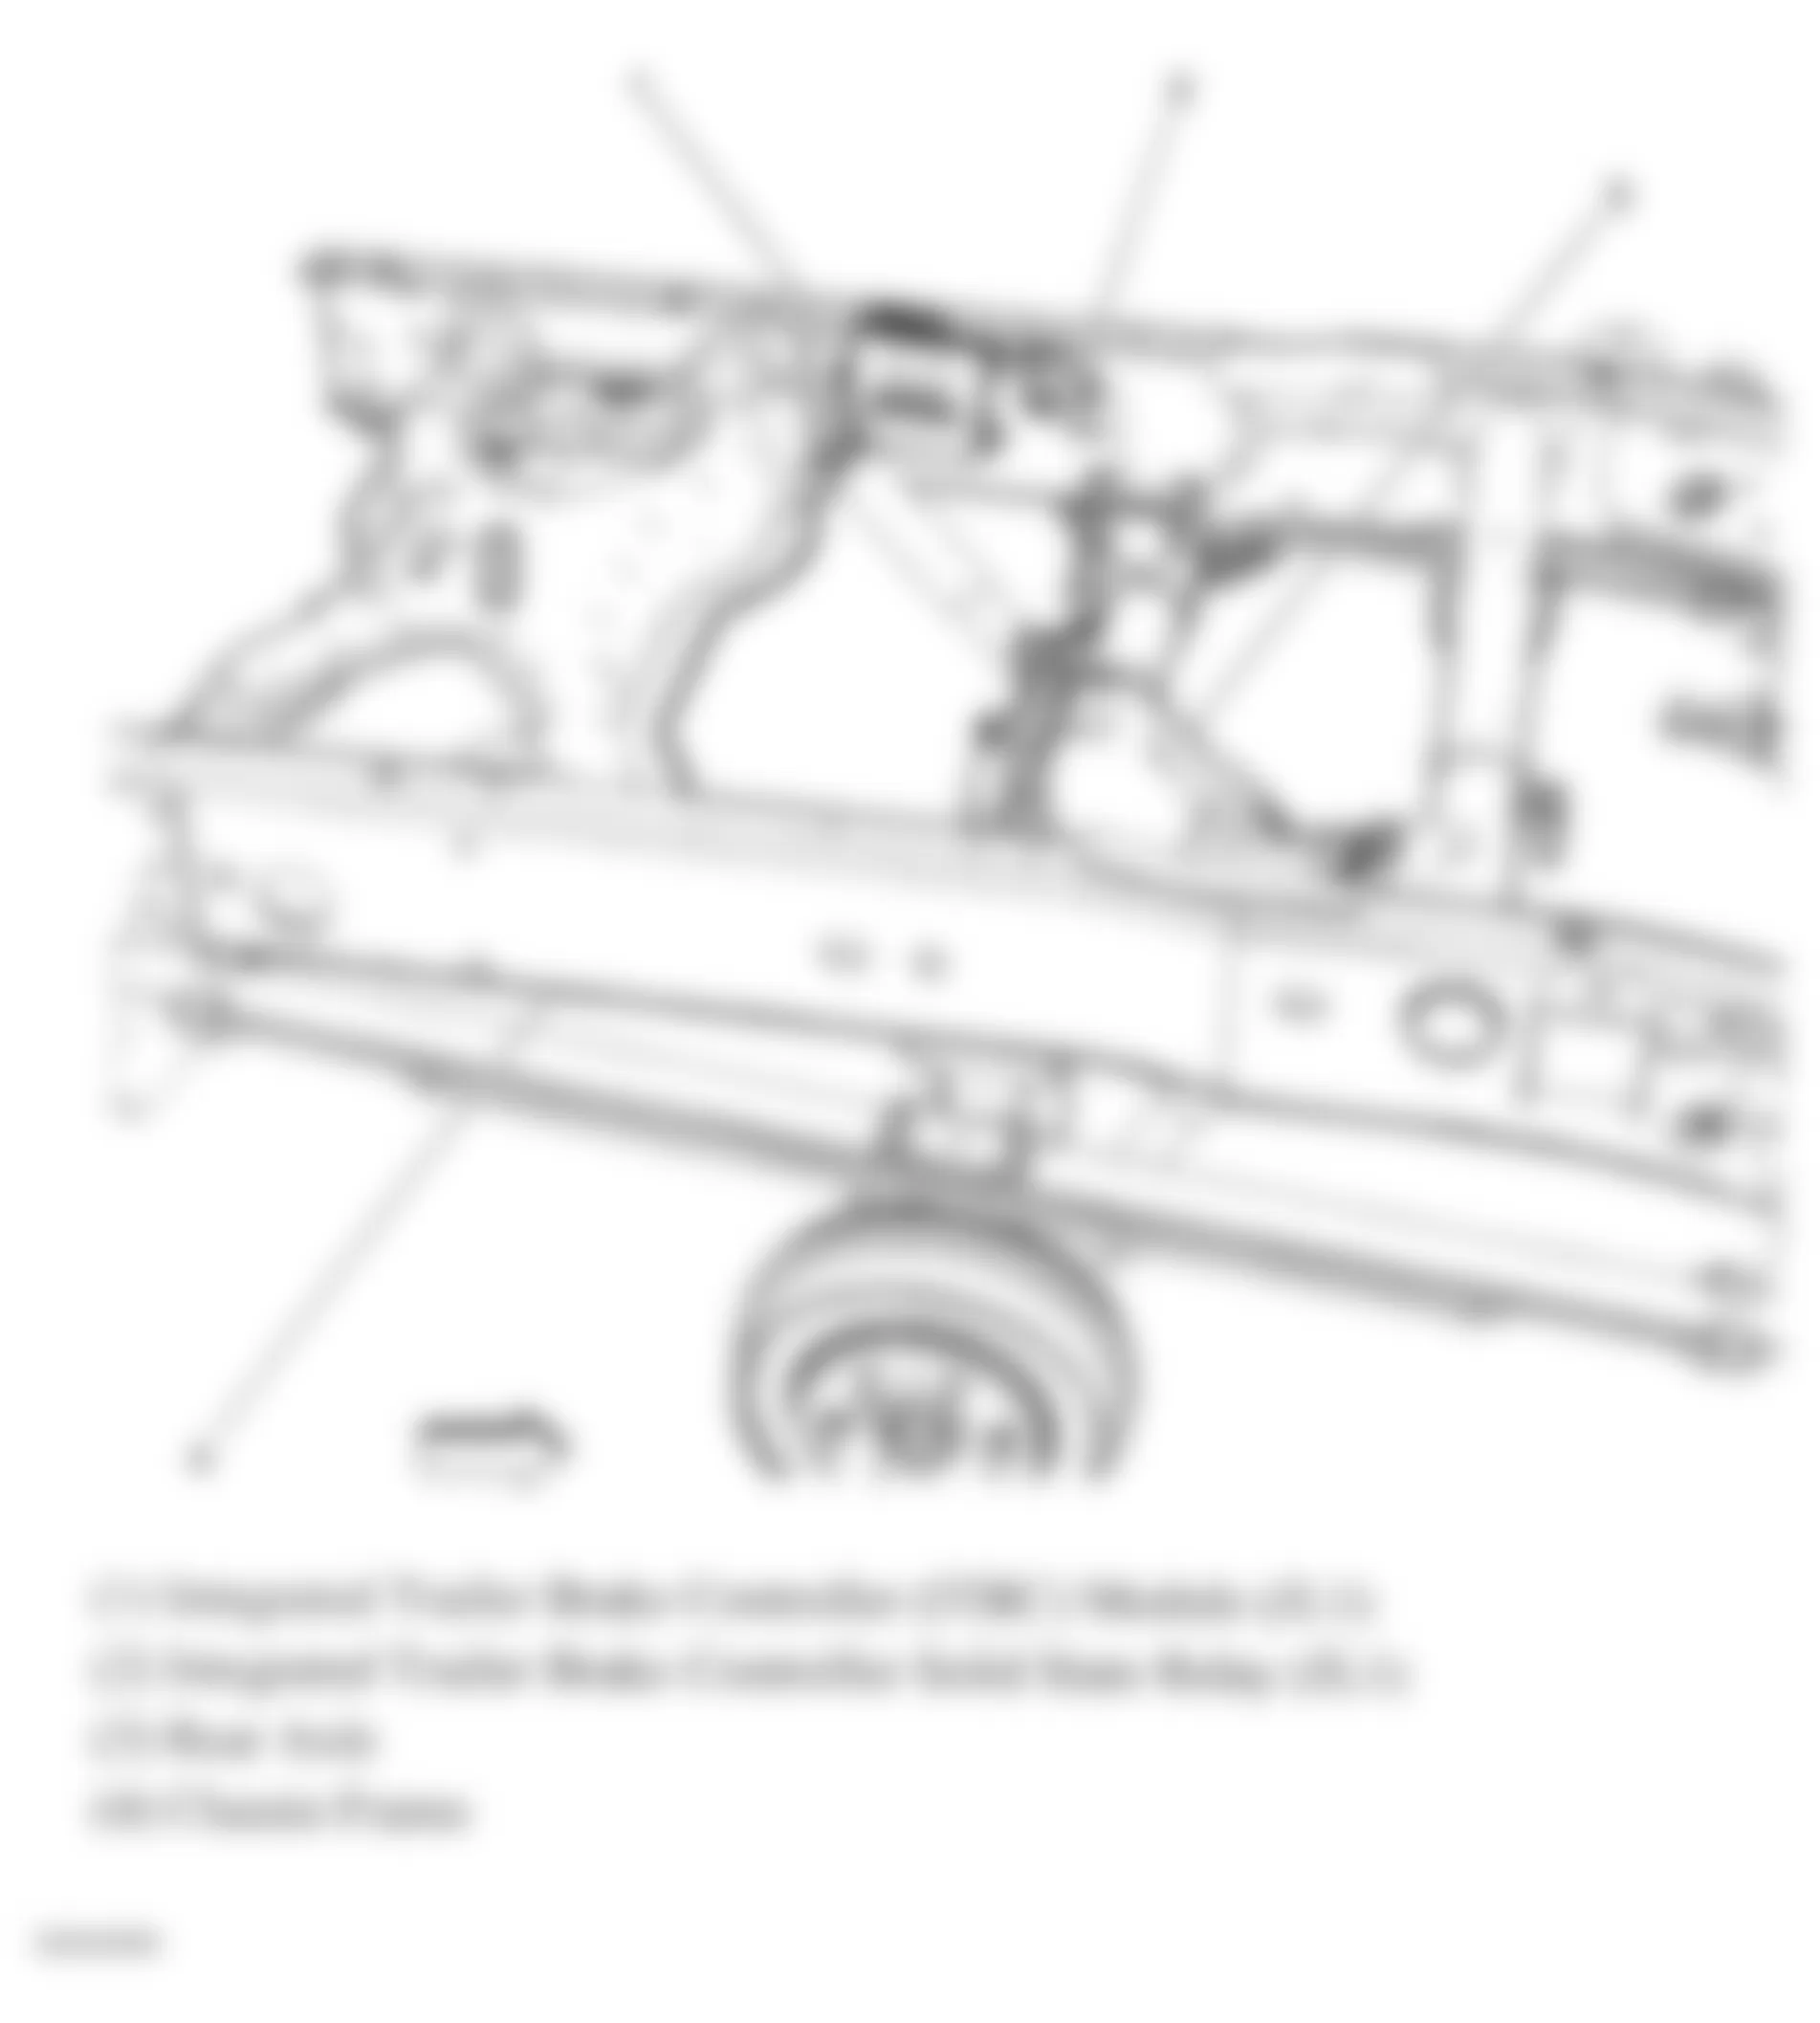 GMC Sierra 3500 HD 2009 - Component Locations -  Rear Of Vehicle